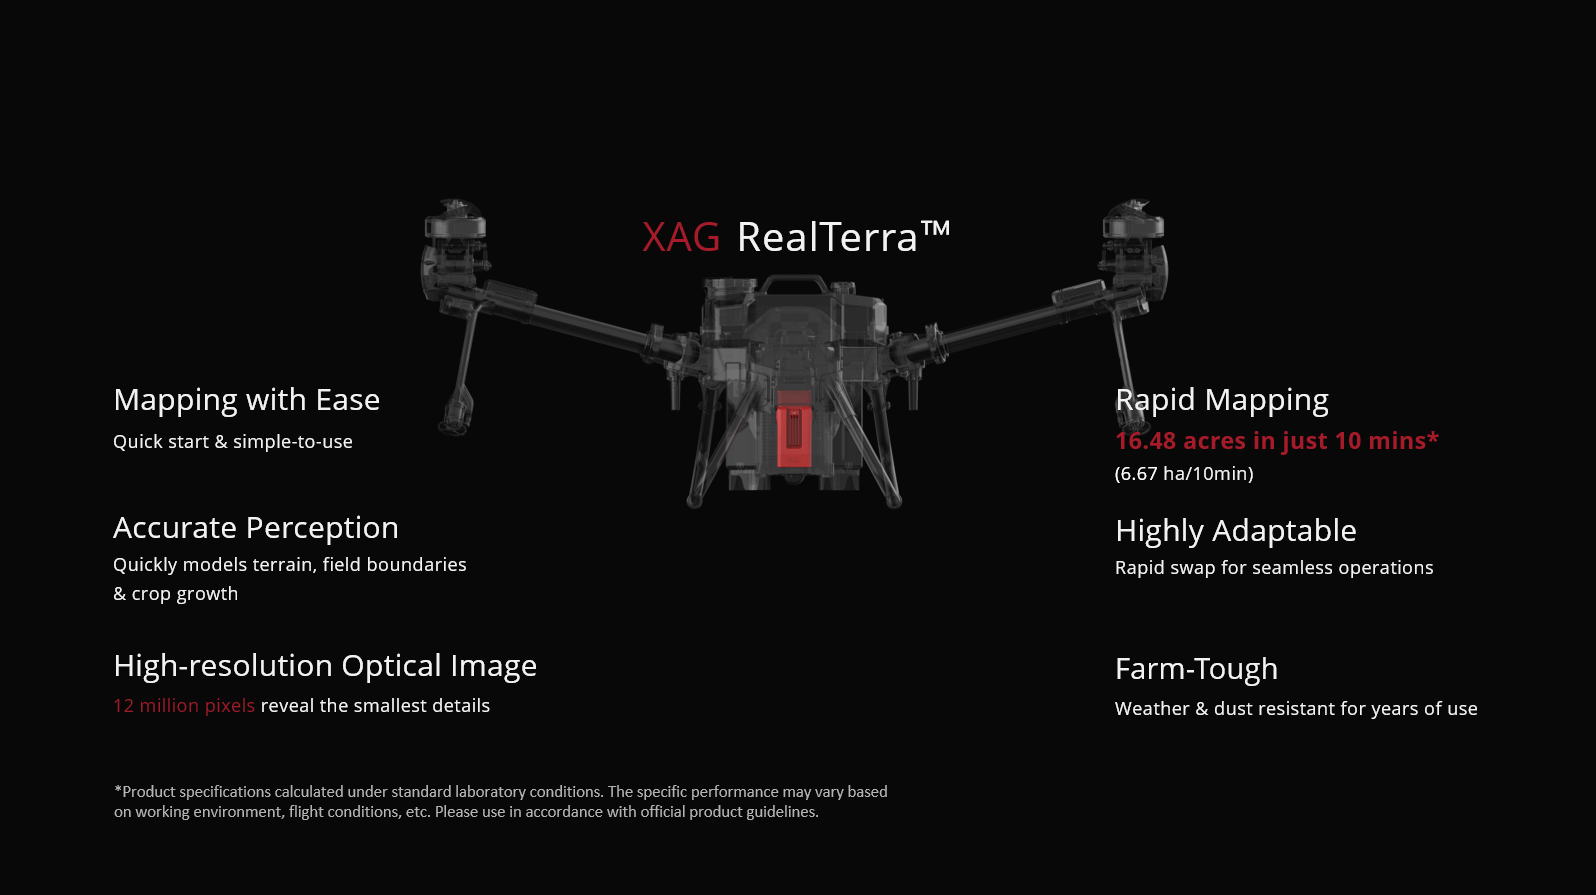 XAG V40 15L Agricultural Drone, XAG RealTerraM Mapping with Ease Rapid Mapping 16.48